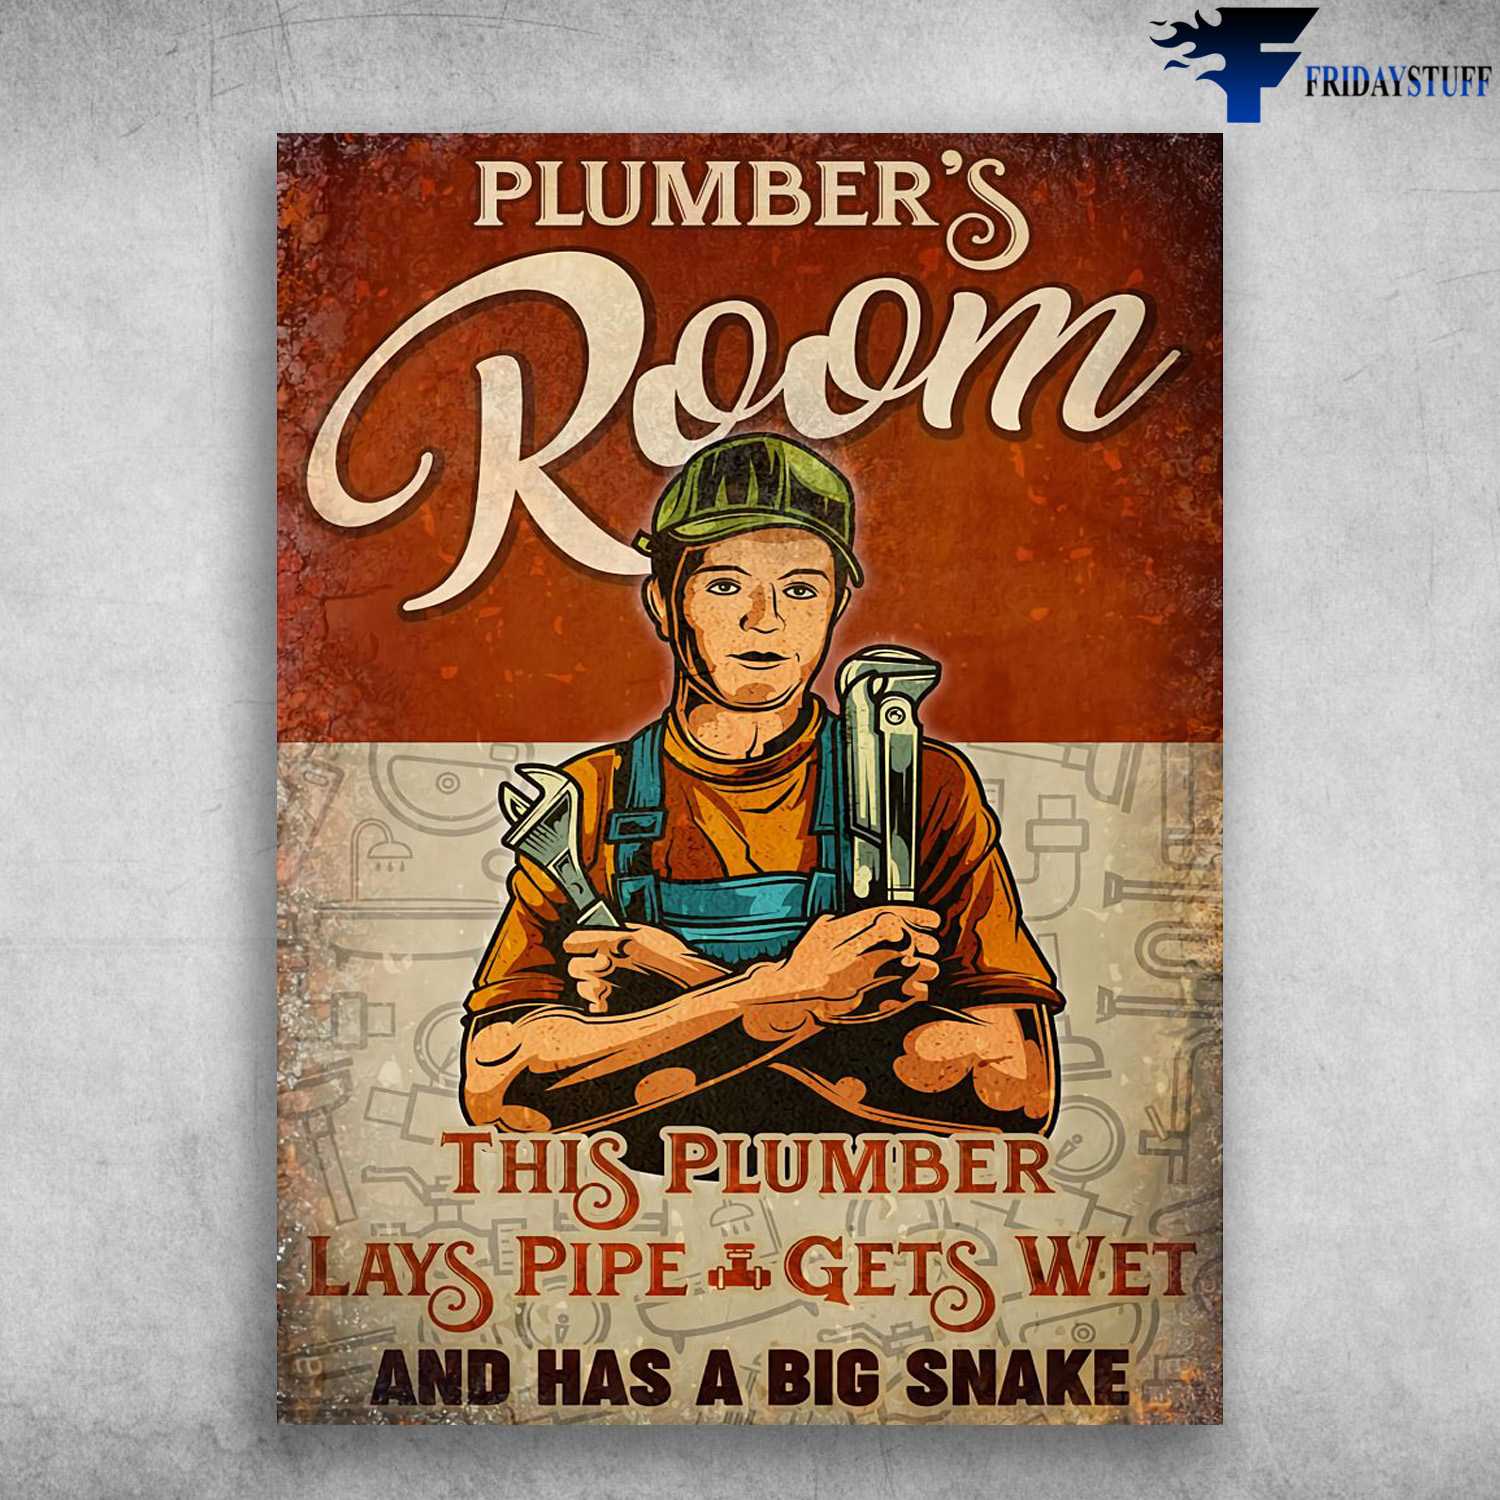 Plumber Poster, Plumber's Room, This Plumber Lays Pipe, Gets Wet, And Has A Big Snake